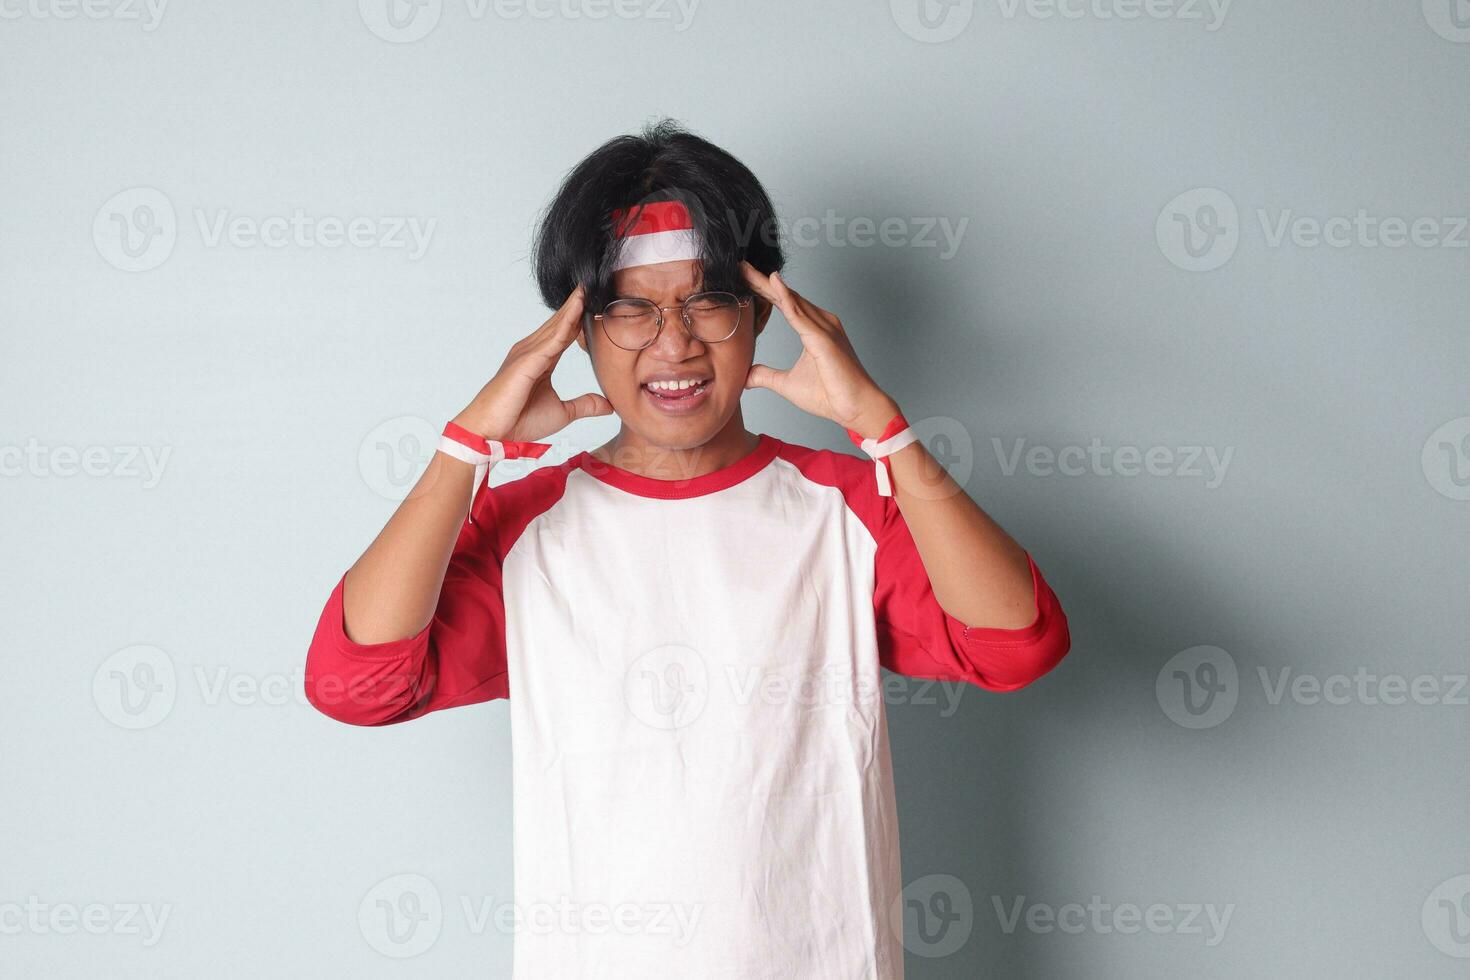 Portrait of attractive Asian man in t-shirt with red and white ribbon on head, screaming with close eyes and wide open mouth, holding hands on forehead. Isolated image on gray background photo